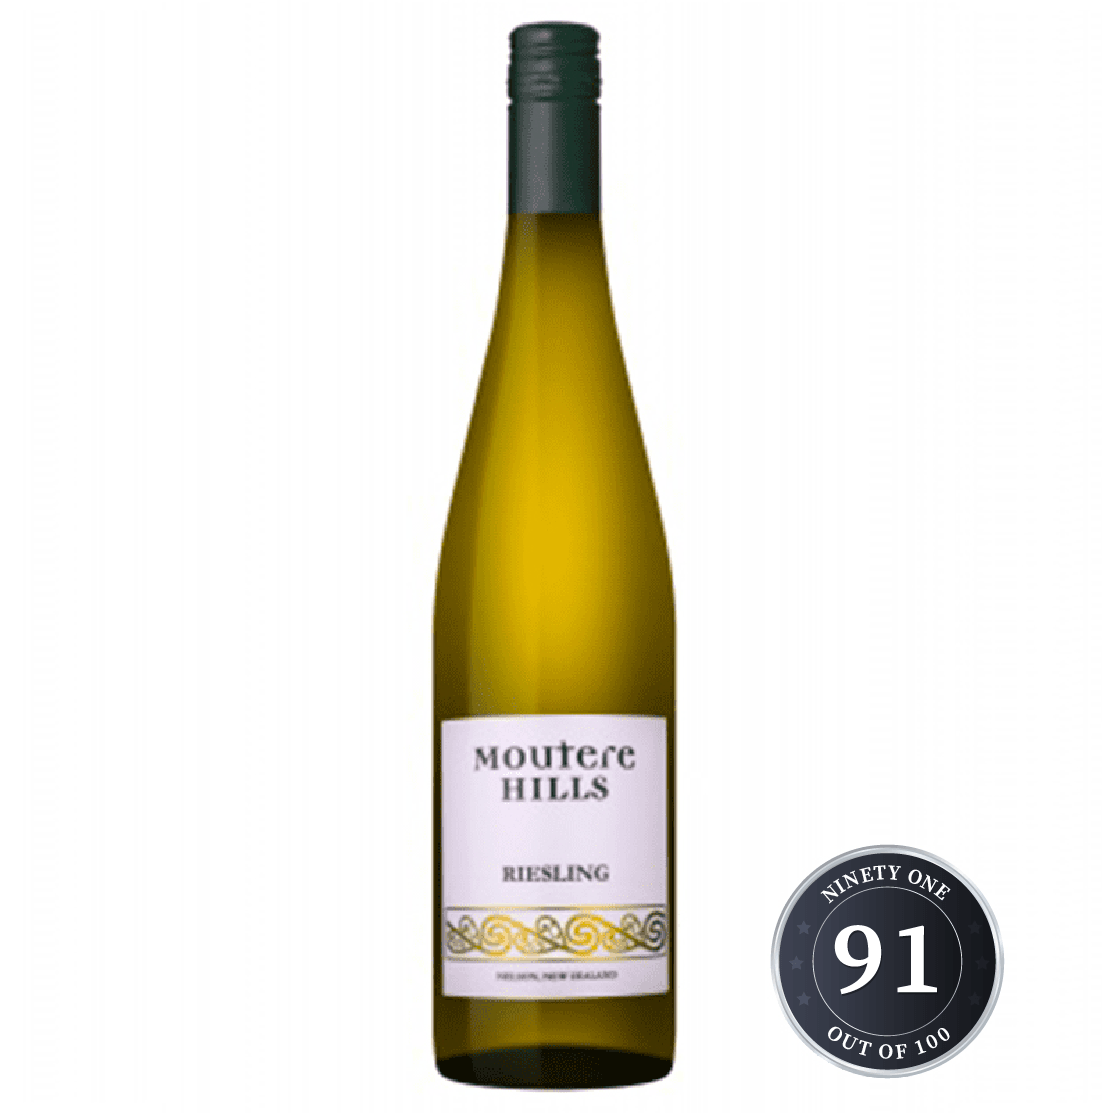 Moutere Hills 2020 Riesling - Powerhouse Wine Company